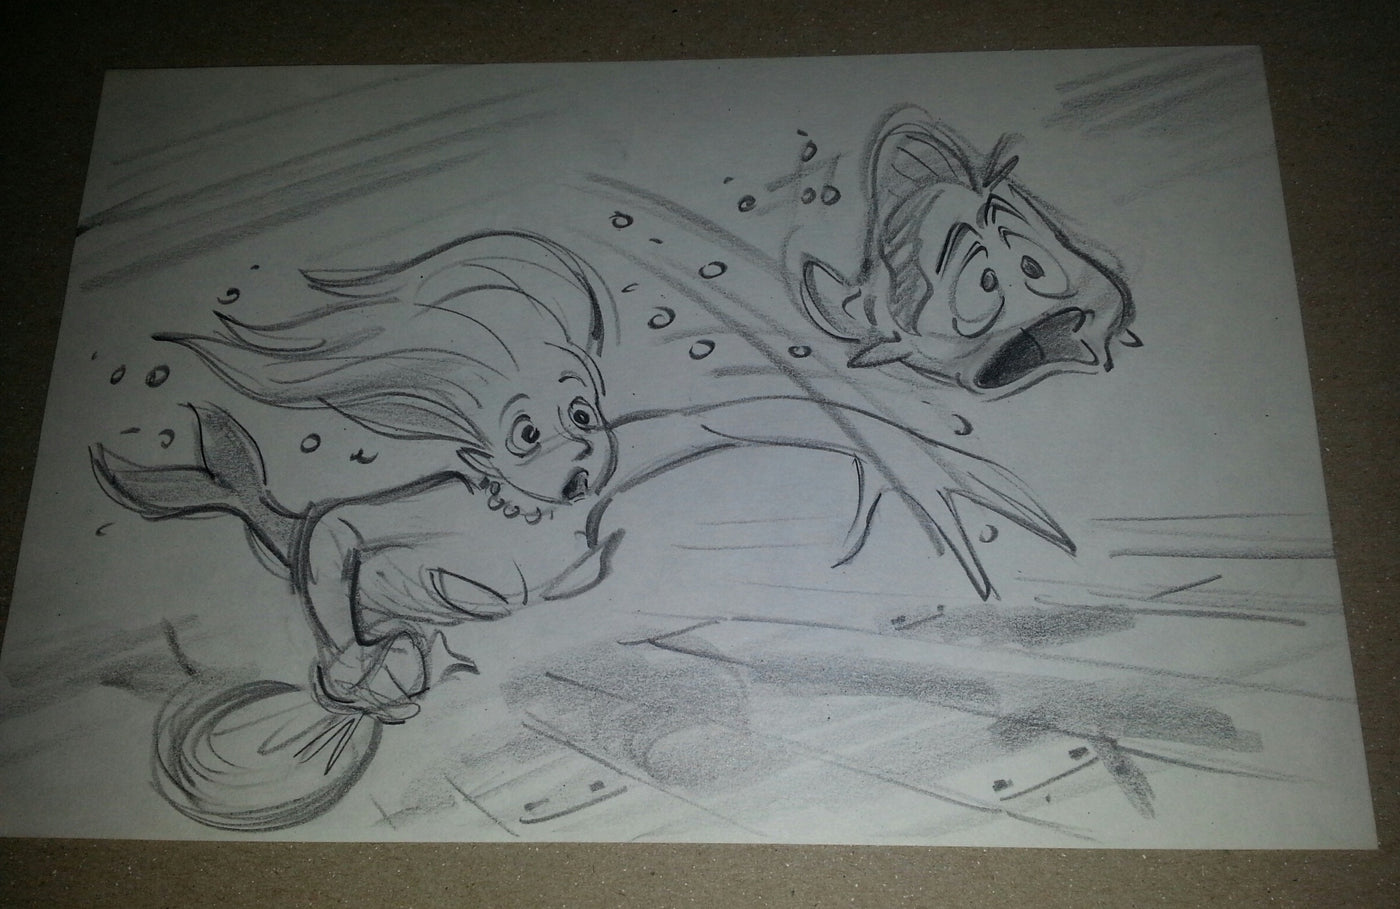 Original Walt Disney Storyboard Drawing From The Little Mermaid featuring Ariel and Flounder